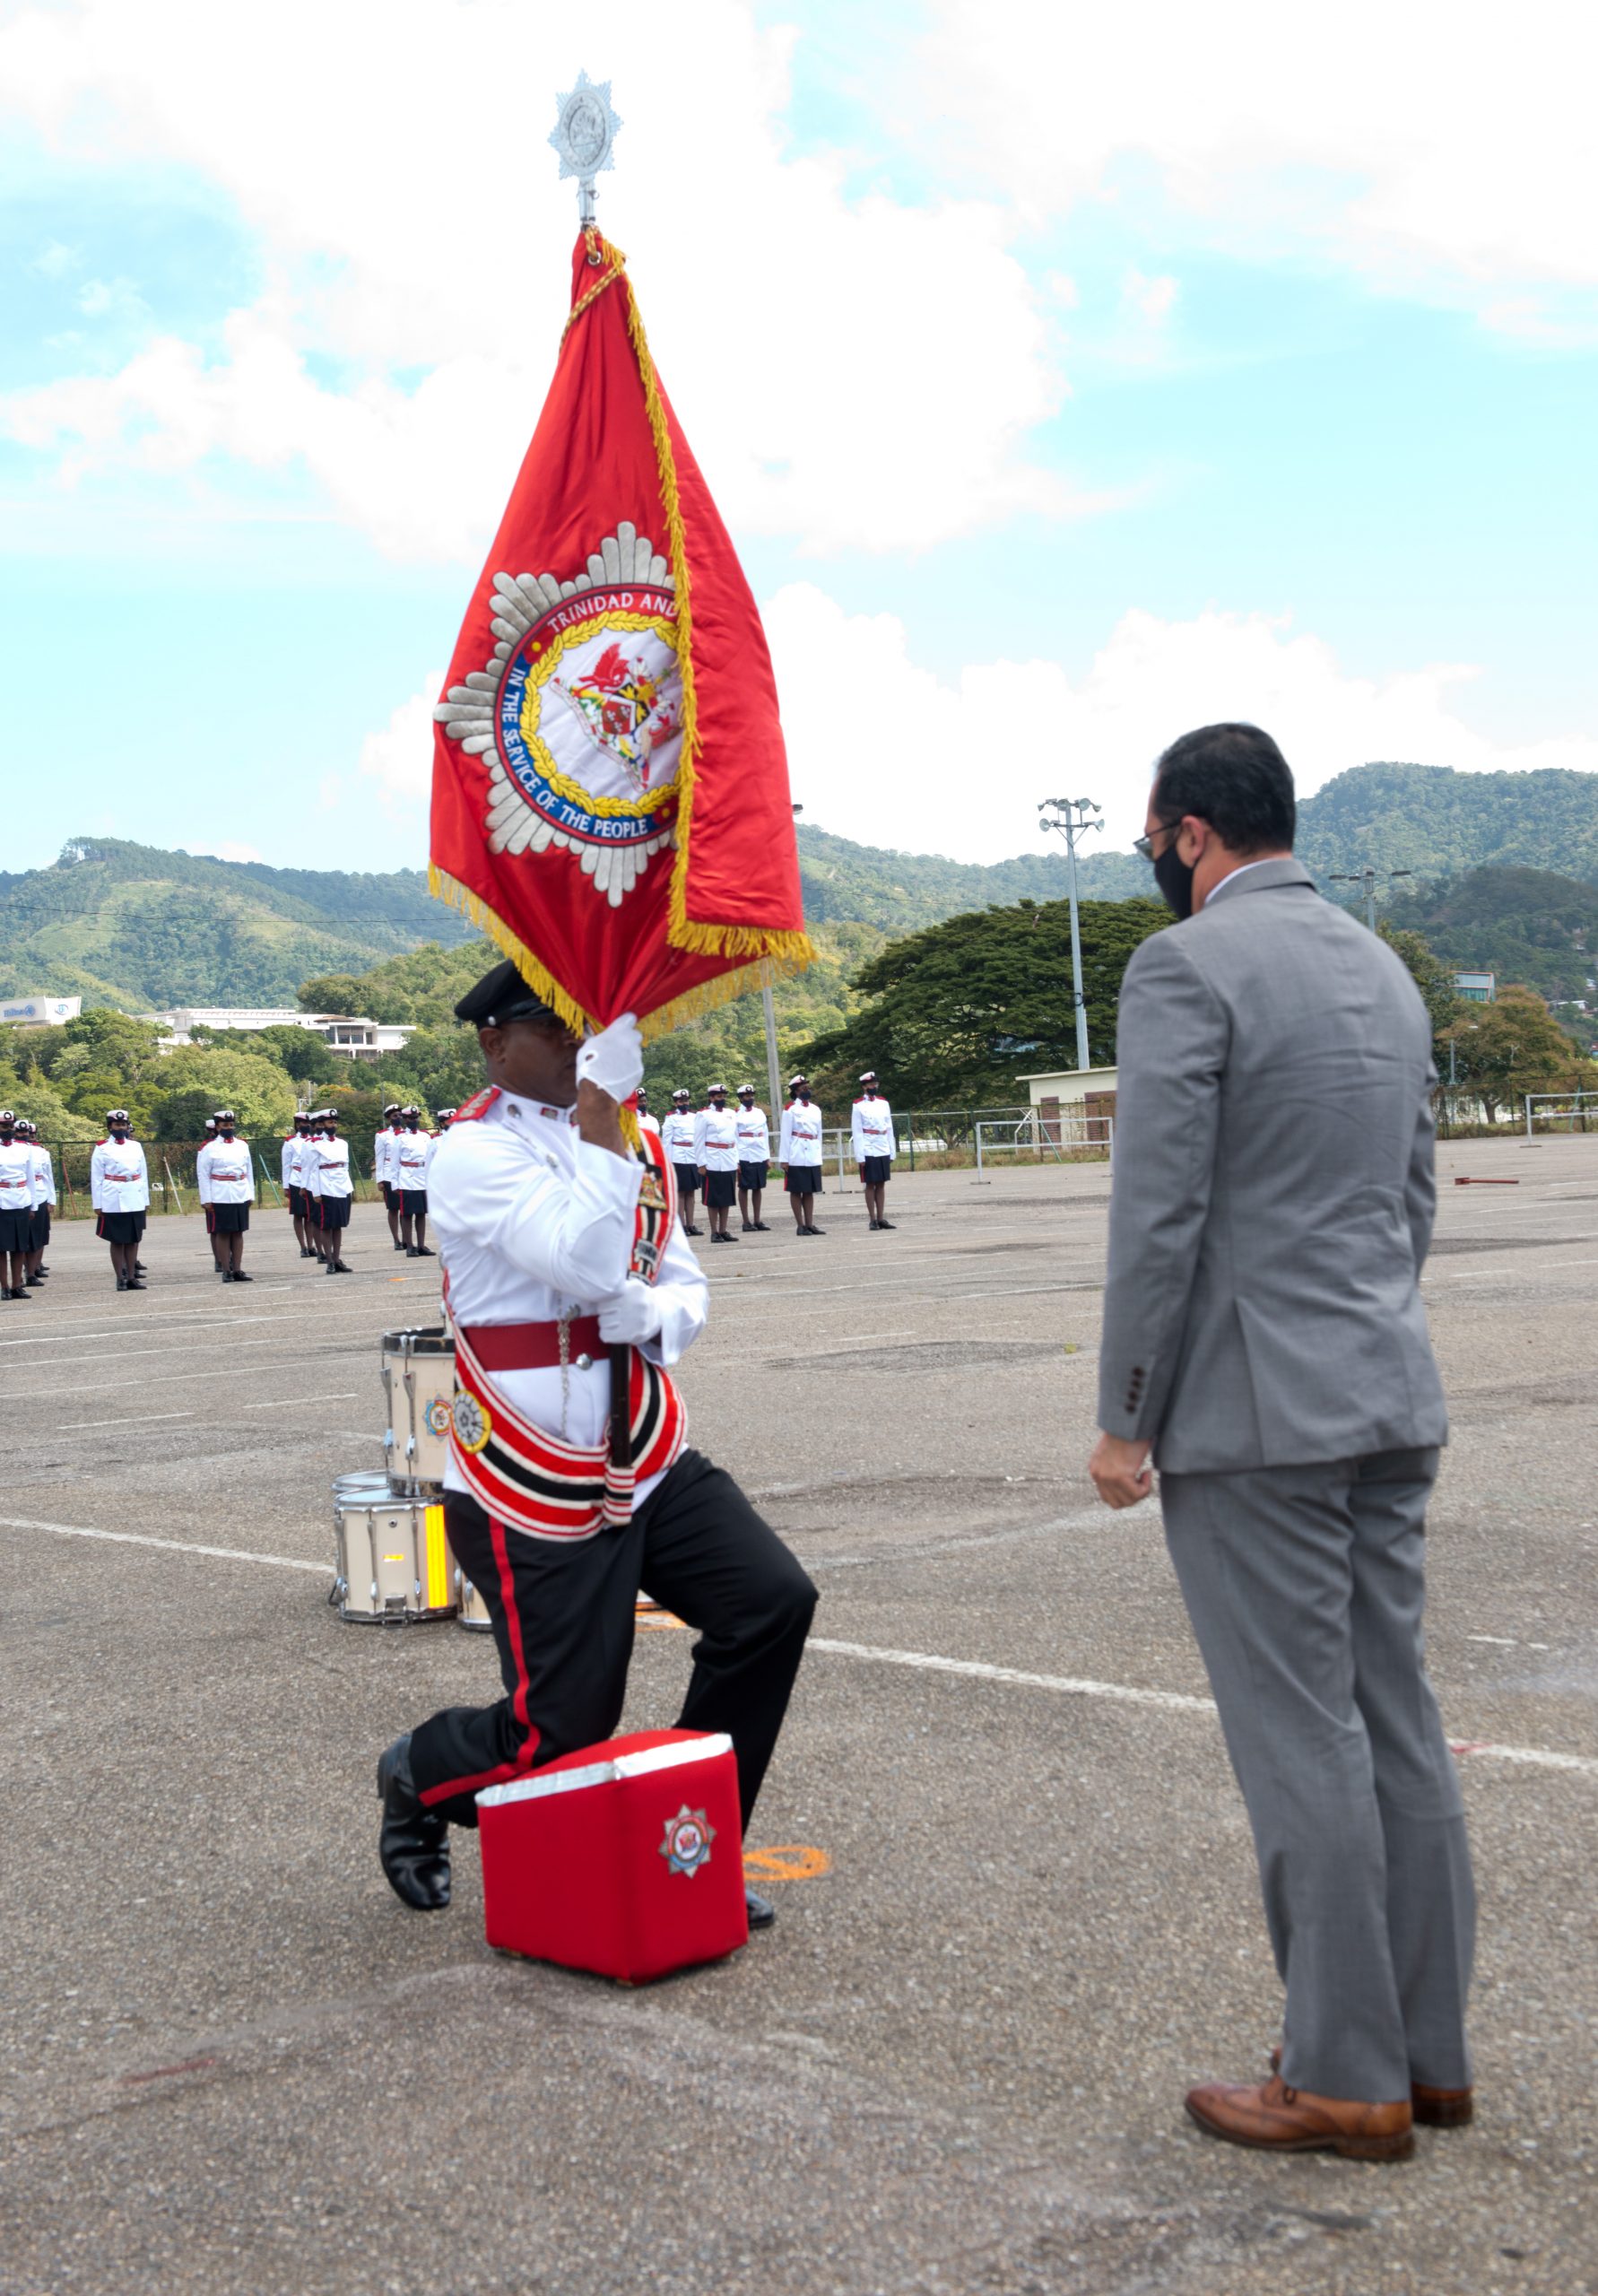 T&T Fire Service role is important during the dry season and the pandemic – Minister Young